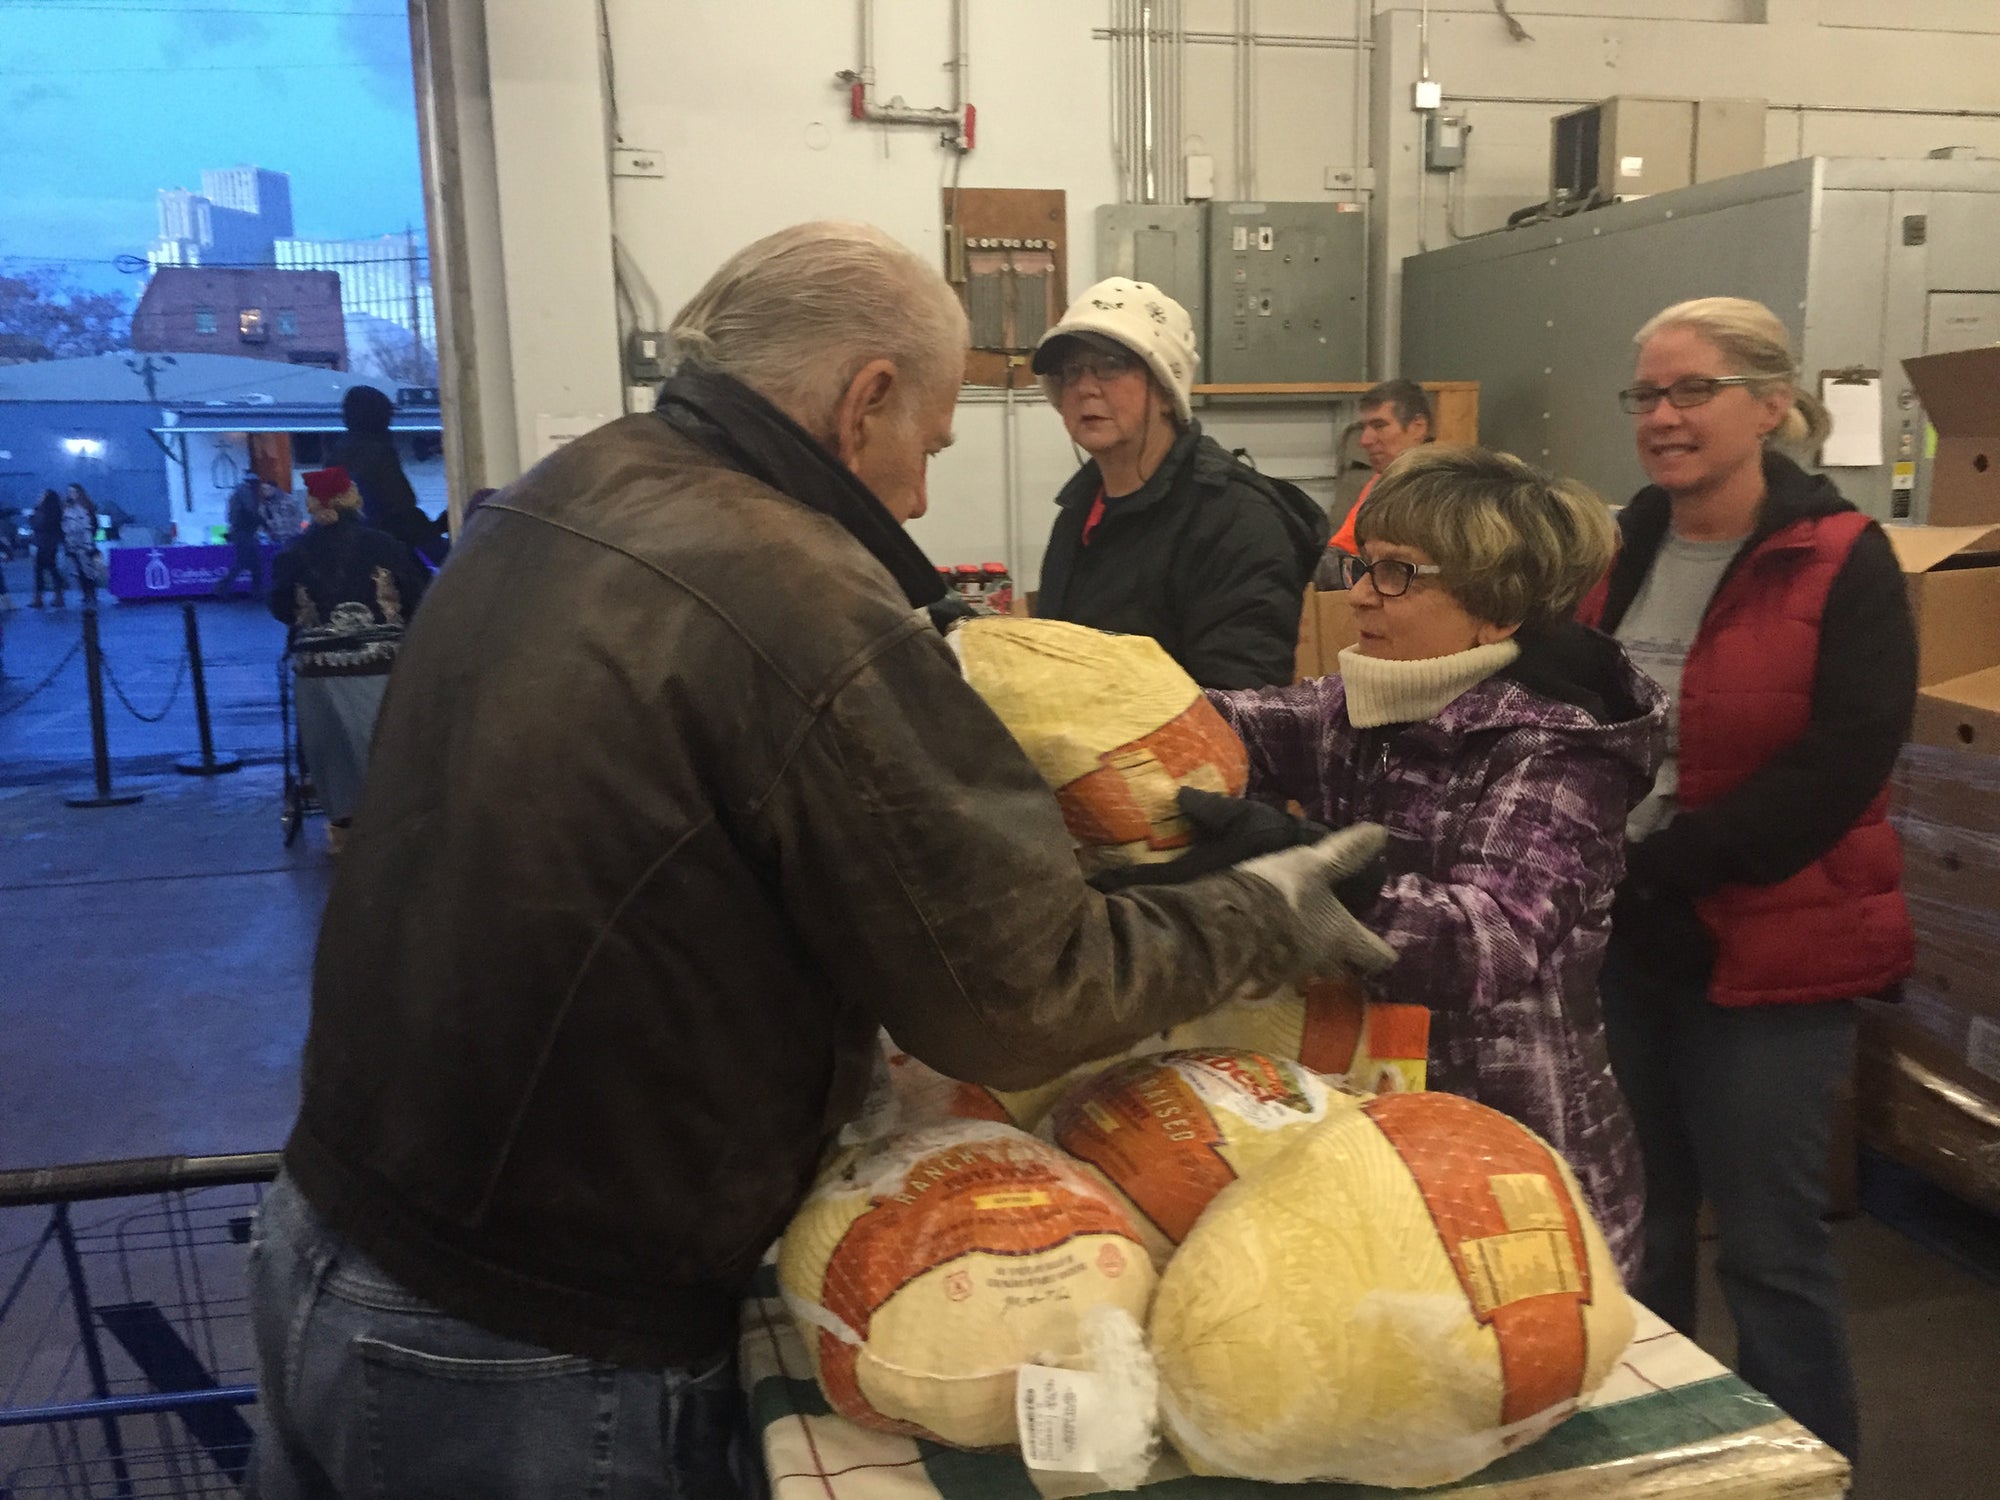 Over 7,000 Families Provided with Holiday Meals